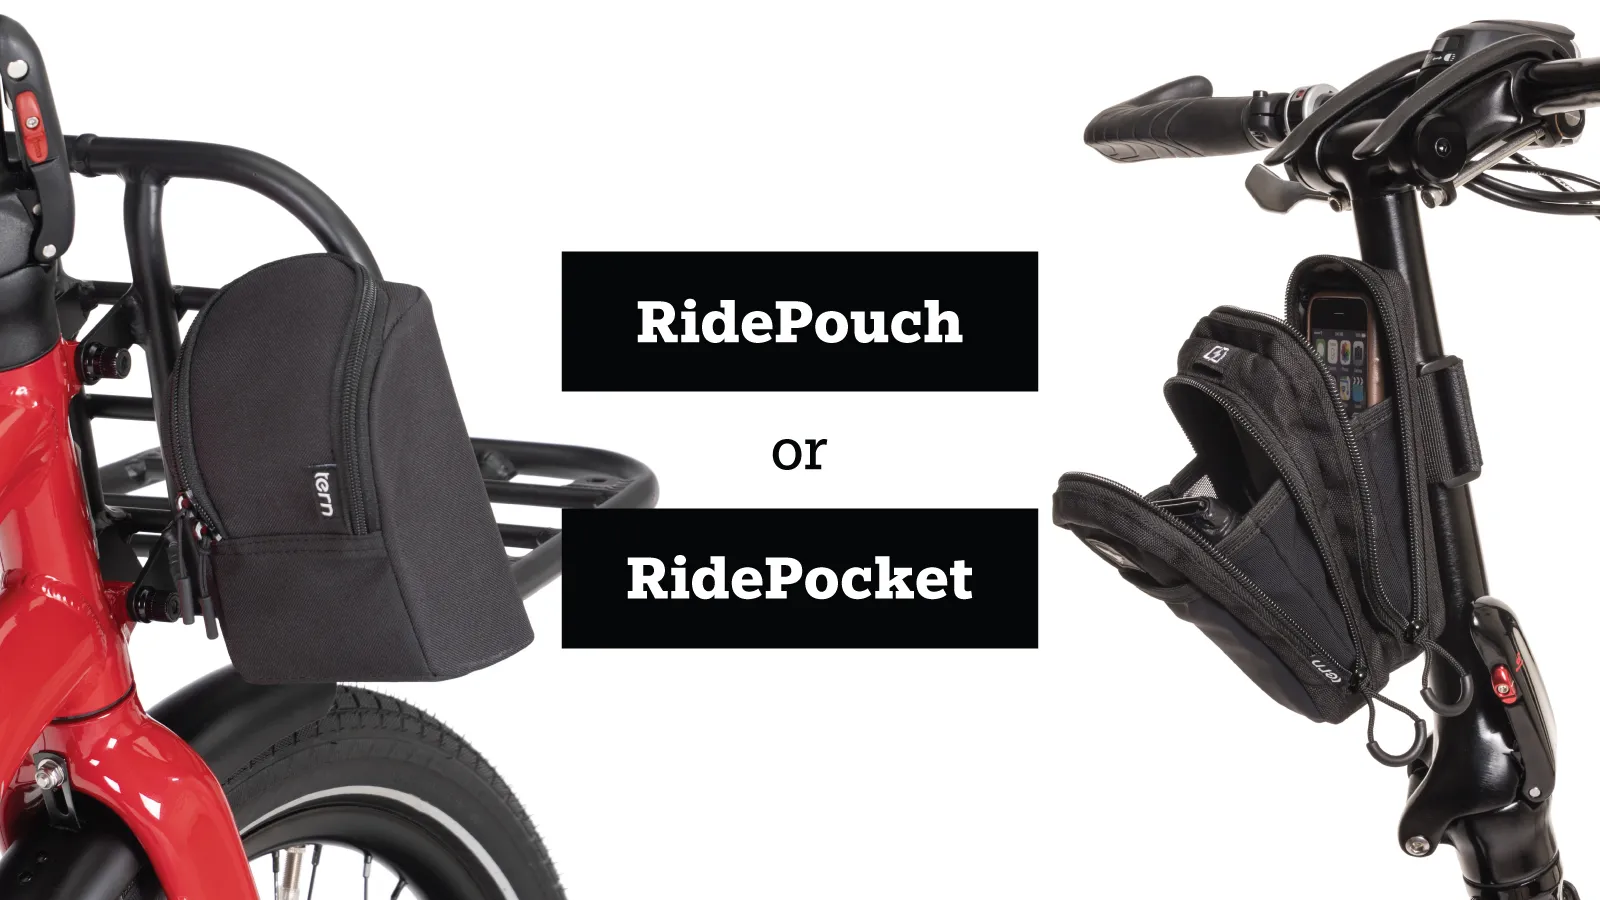 RidePouch vs. RidePocket: How to Choose